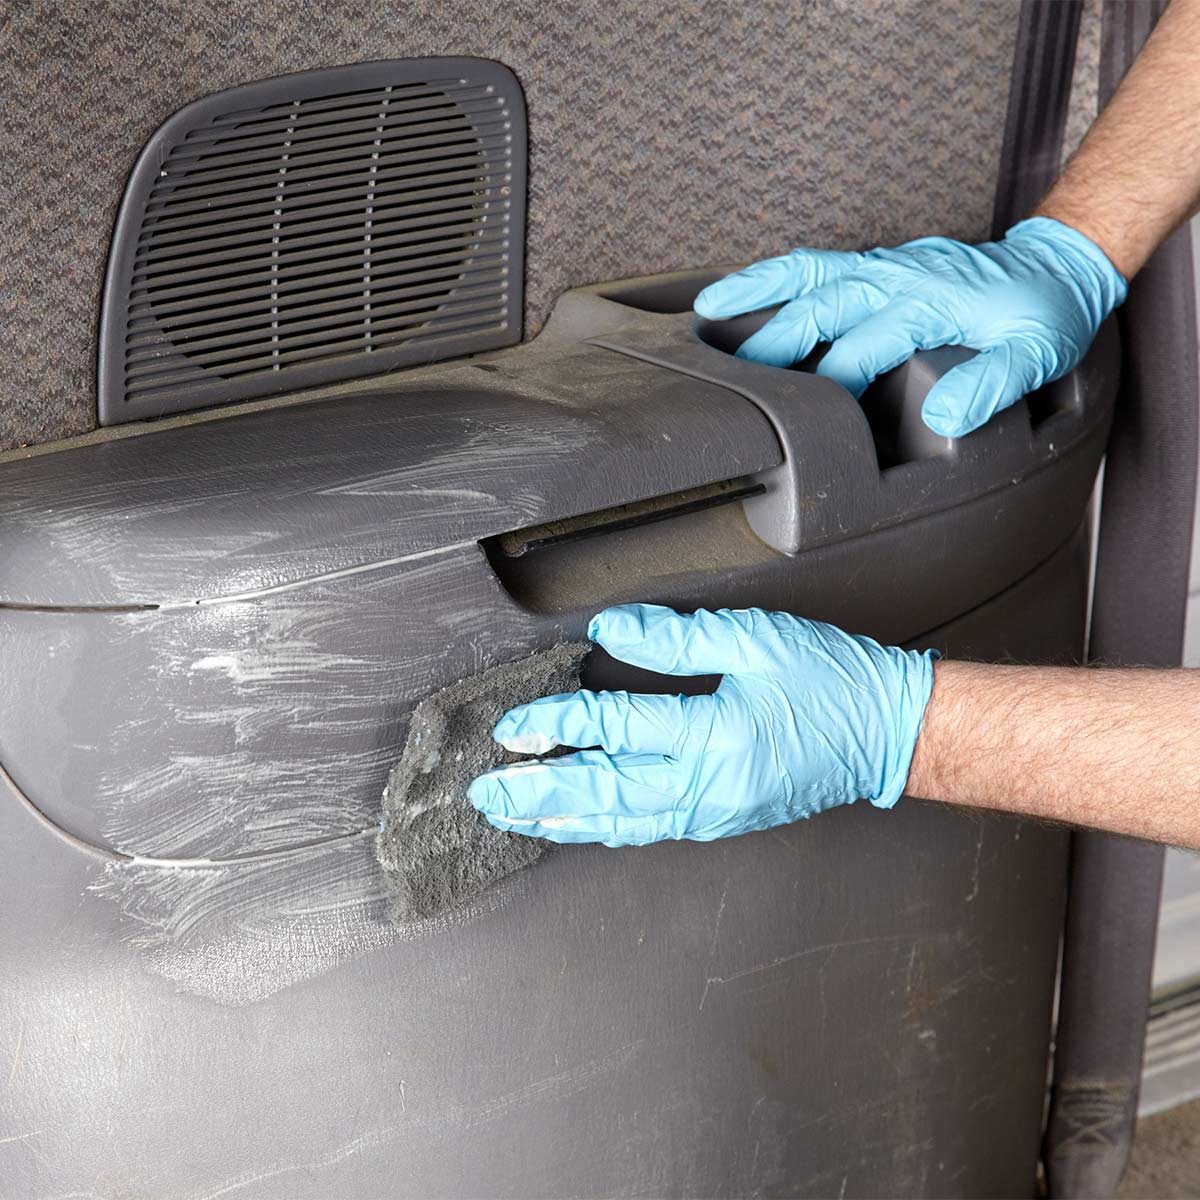 Car Detailing Tricks That Will Help You Make The Job Easier - AllDayChic